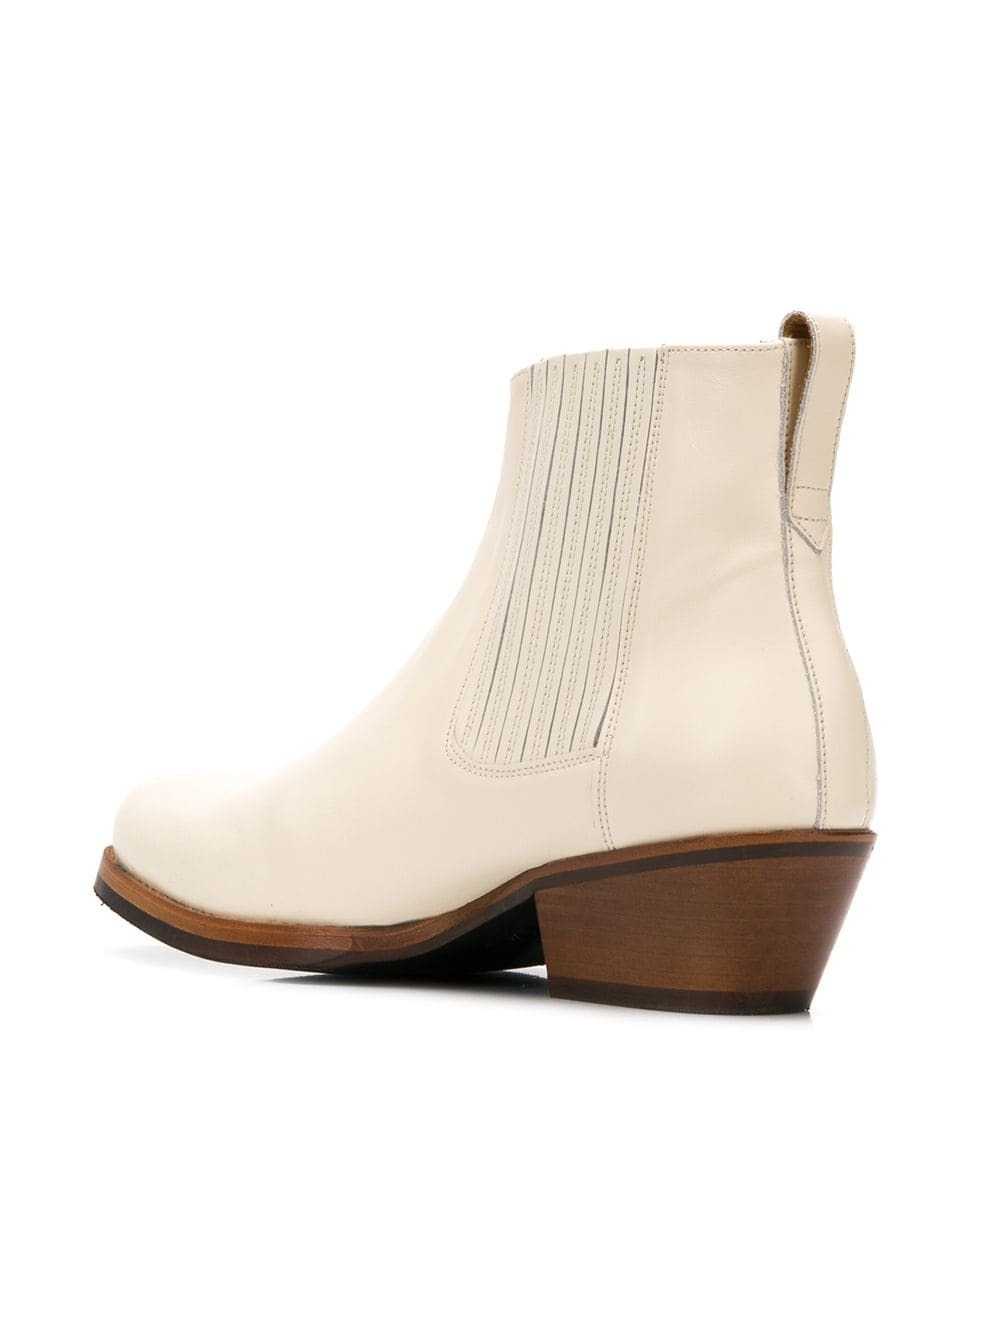 Our Legacy Cuban Heel Ankle Boots, $518 | farfetch.com